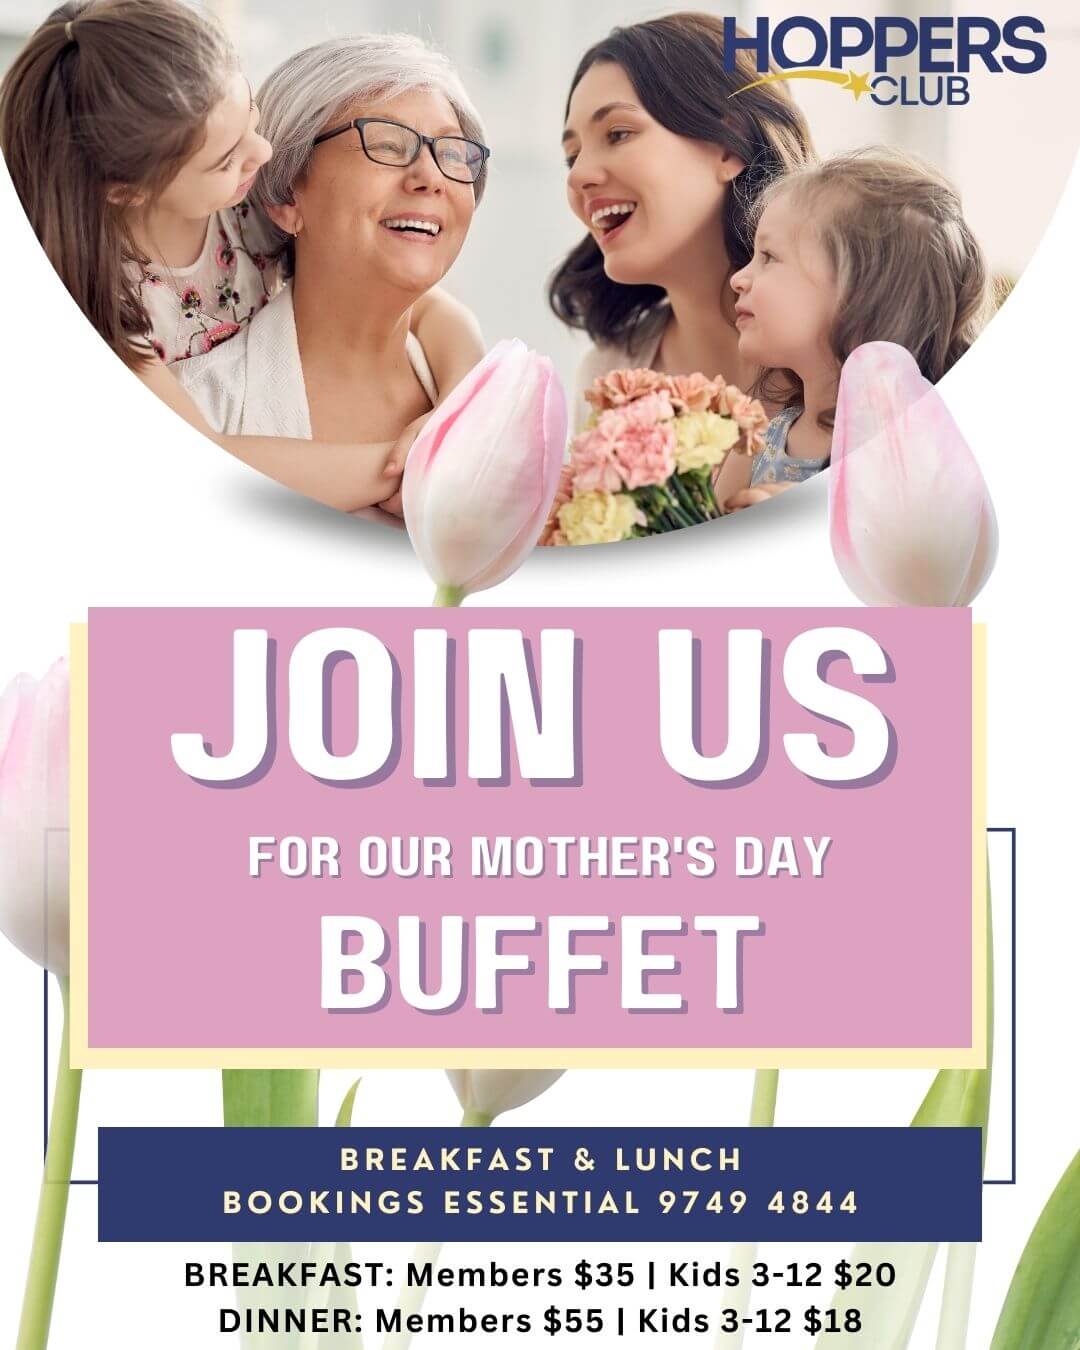 Make Mum's day this Mother's Day. Our Mother's Day Buffet is for Breakfast & Lunch. Normal menu for Dinner.